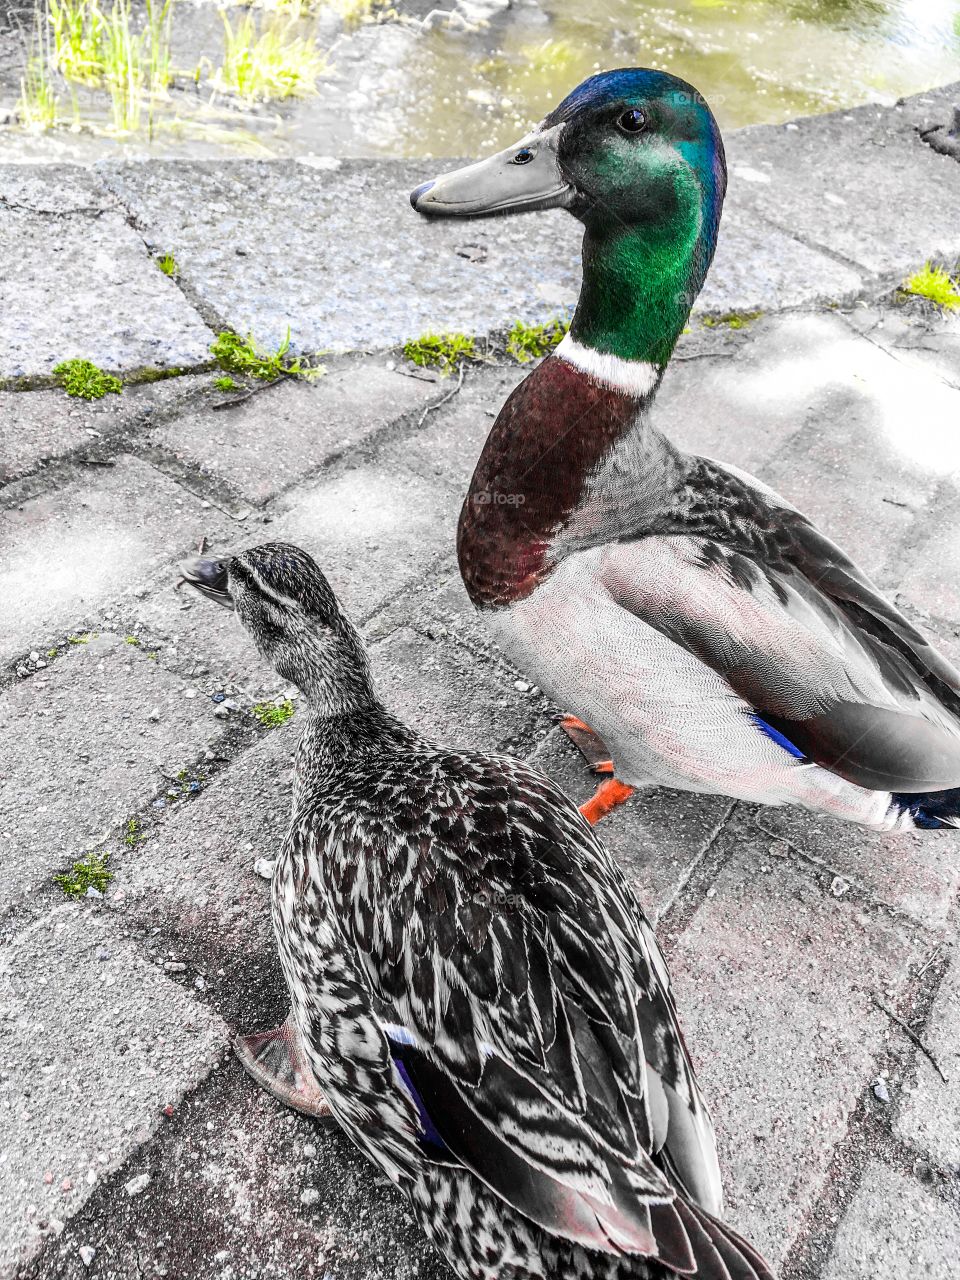 Curious ducks, male and female